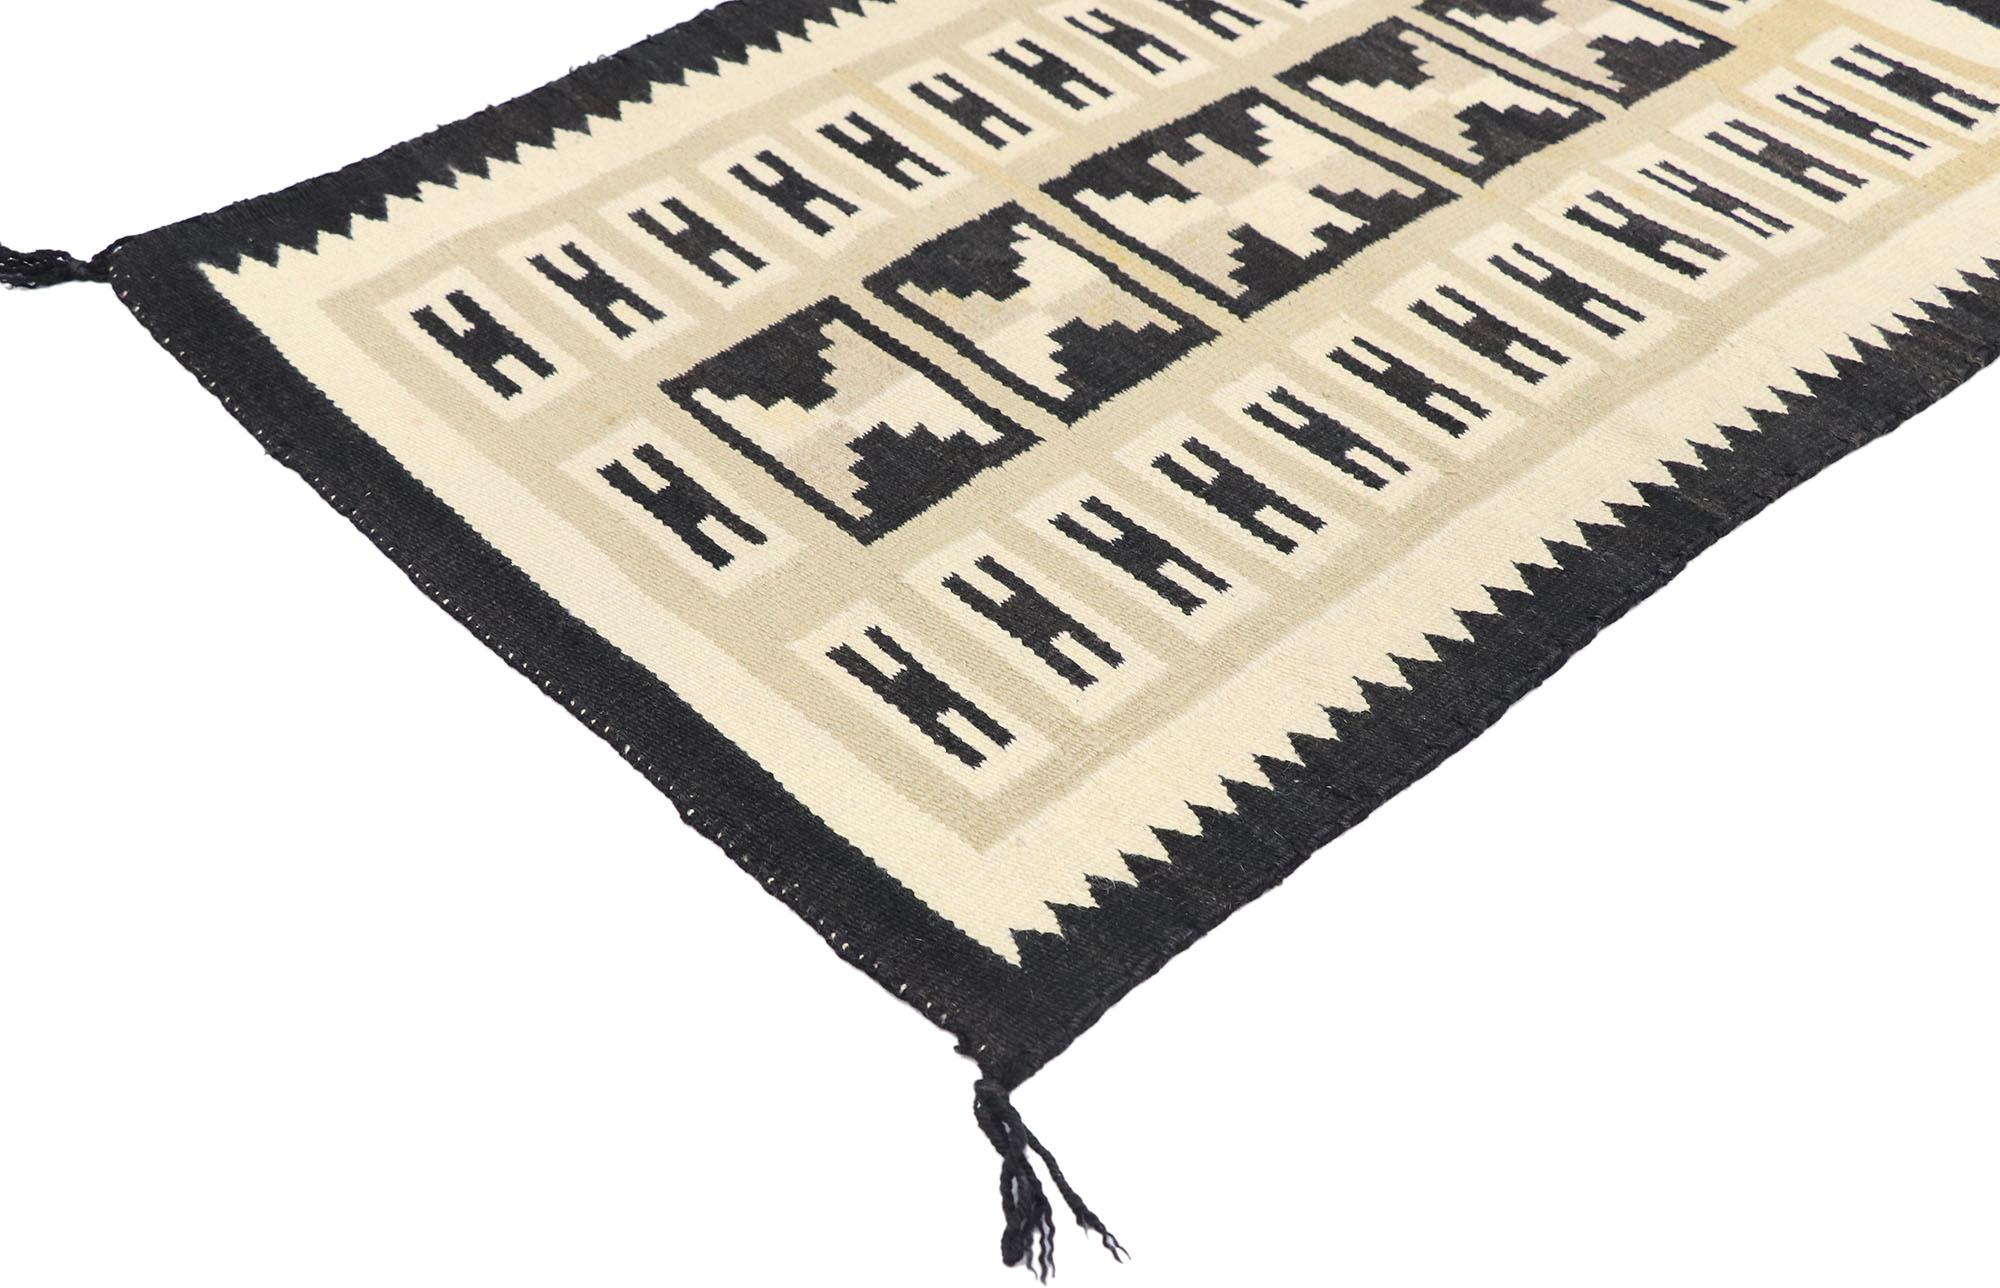 77776, vintage Navajo Kilim rug with Two Grey Hills style. With its bold expressive design, incredible detail and texture, this hand-woven wool vintage Navajo Kilim rug is a captivating vision of woven beauty highlighting Native American style with